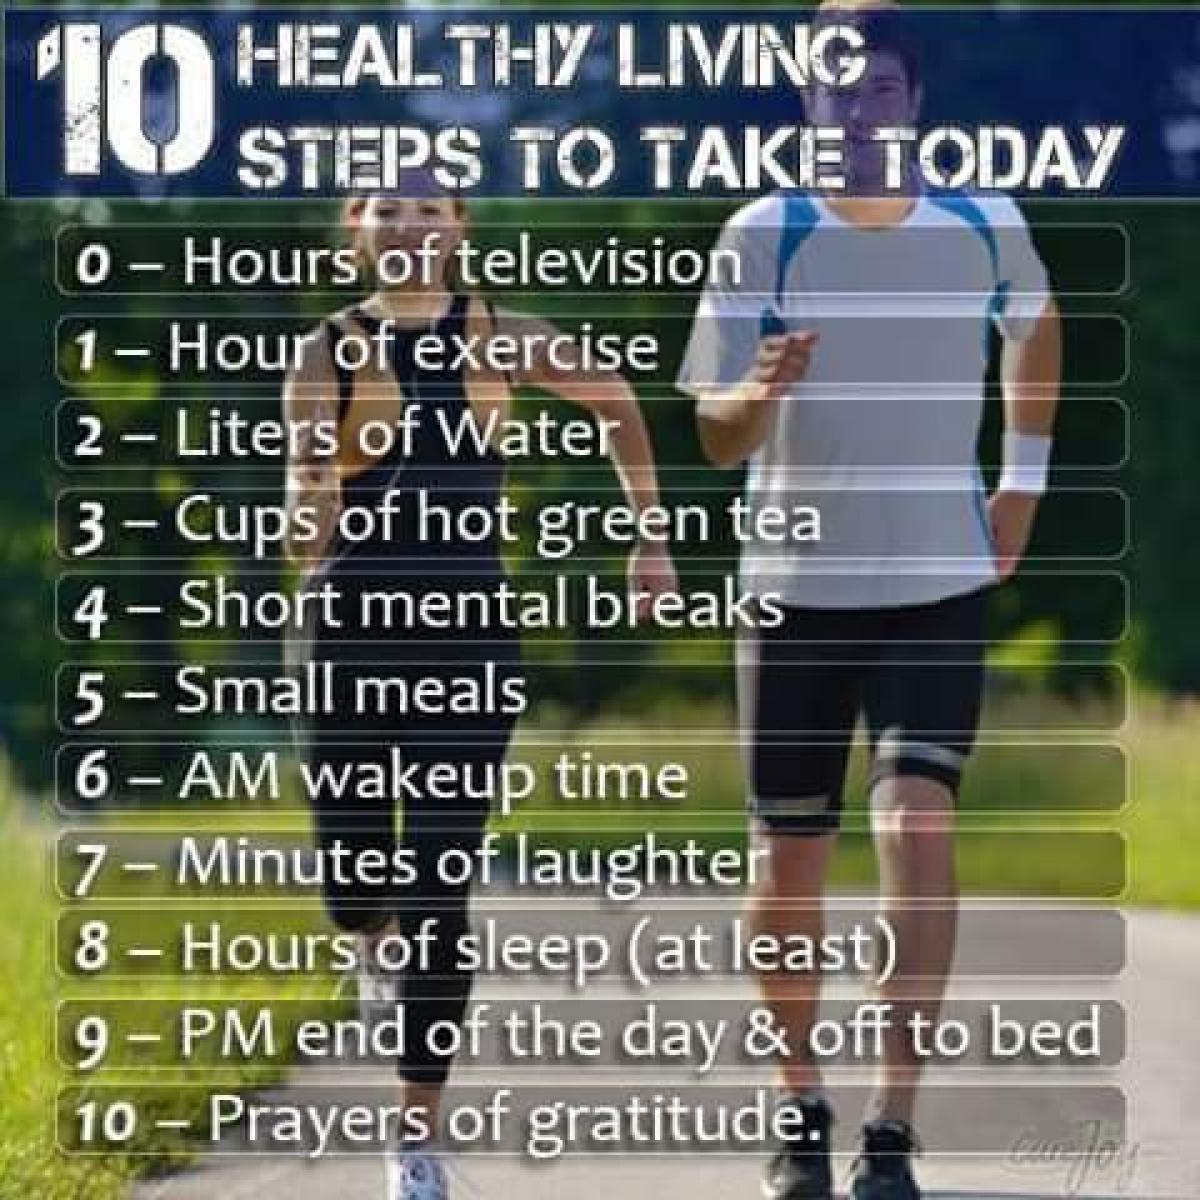 10 simple steps for healthy living